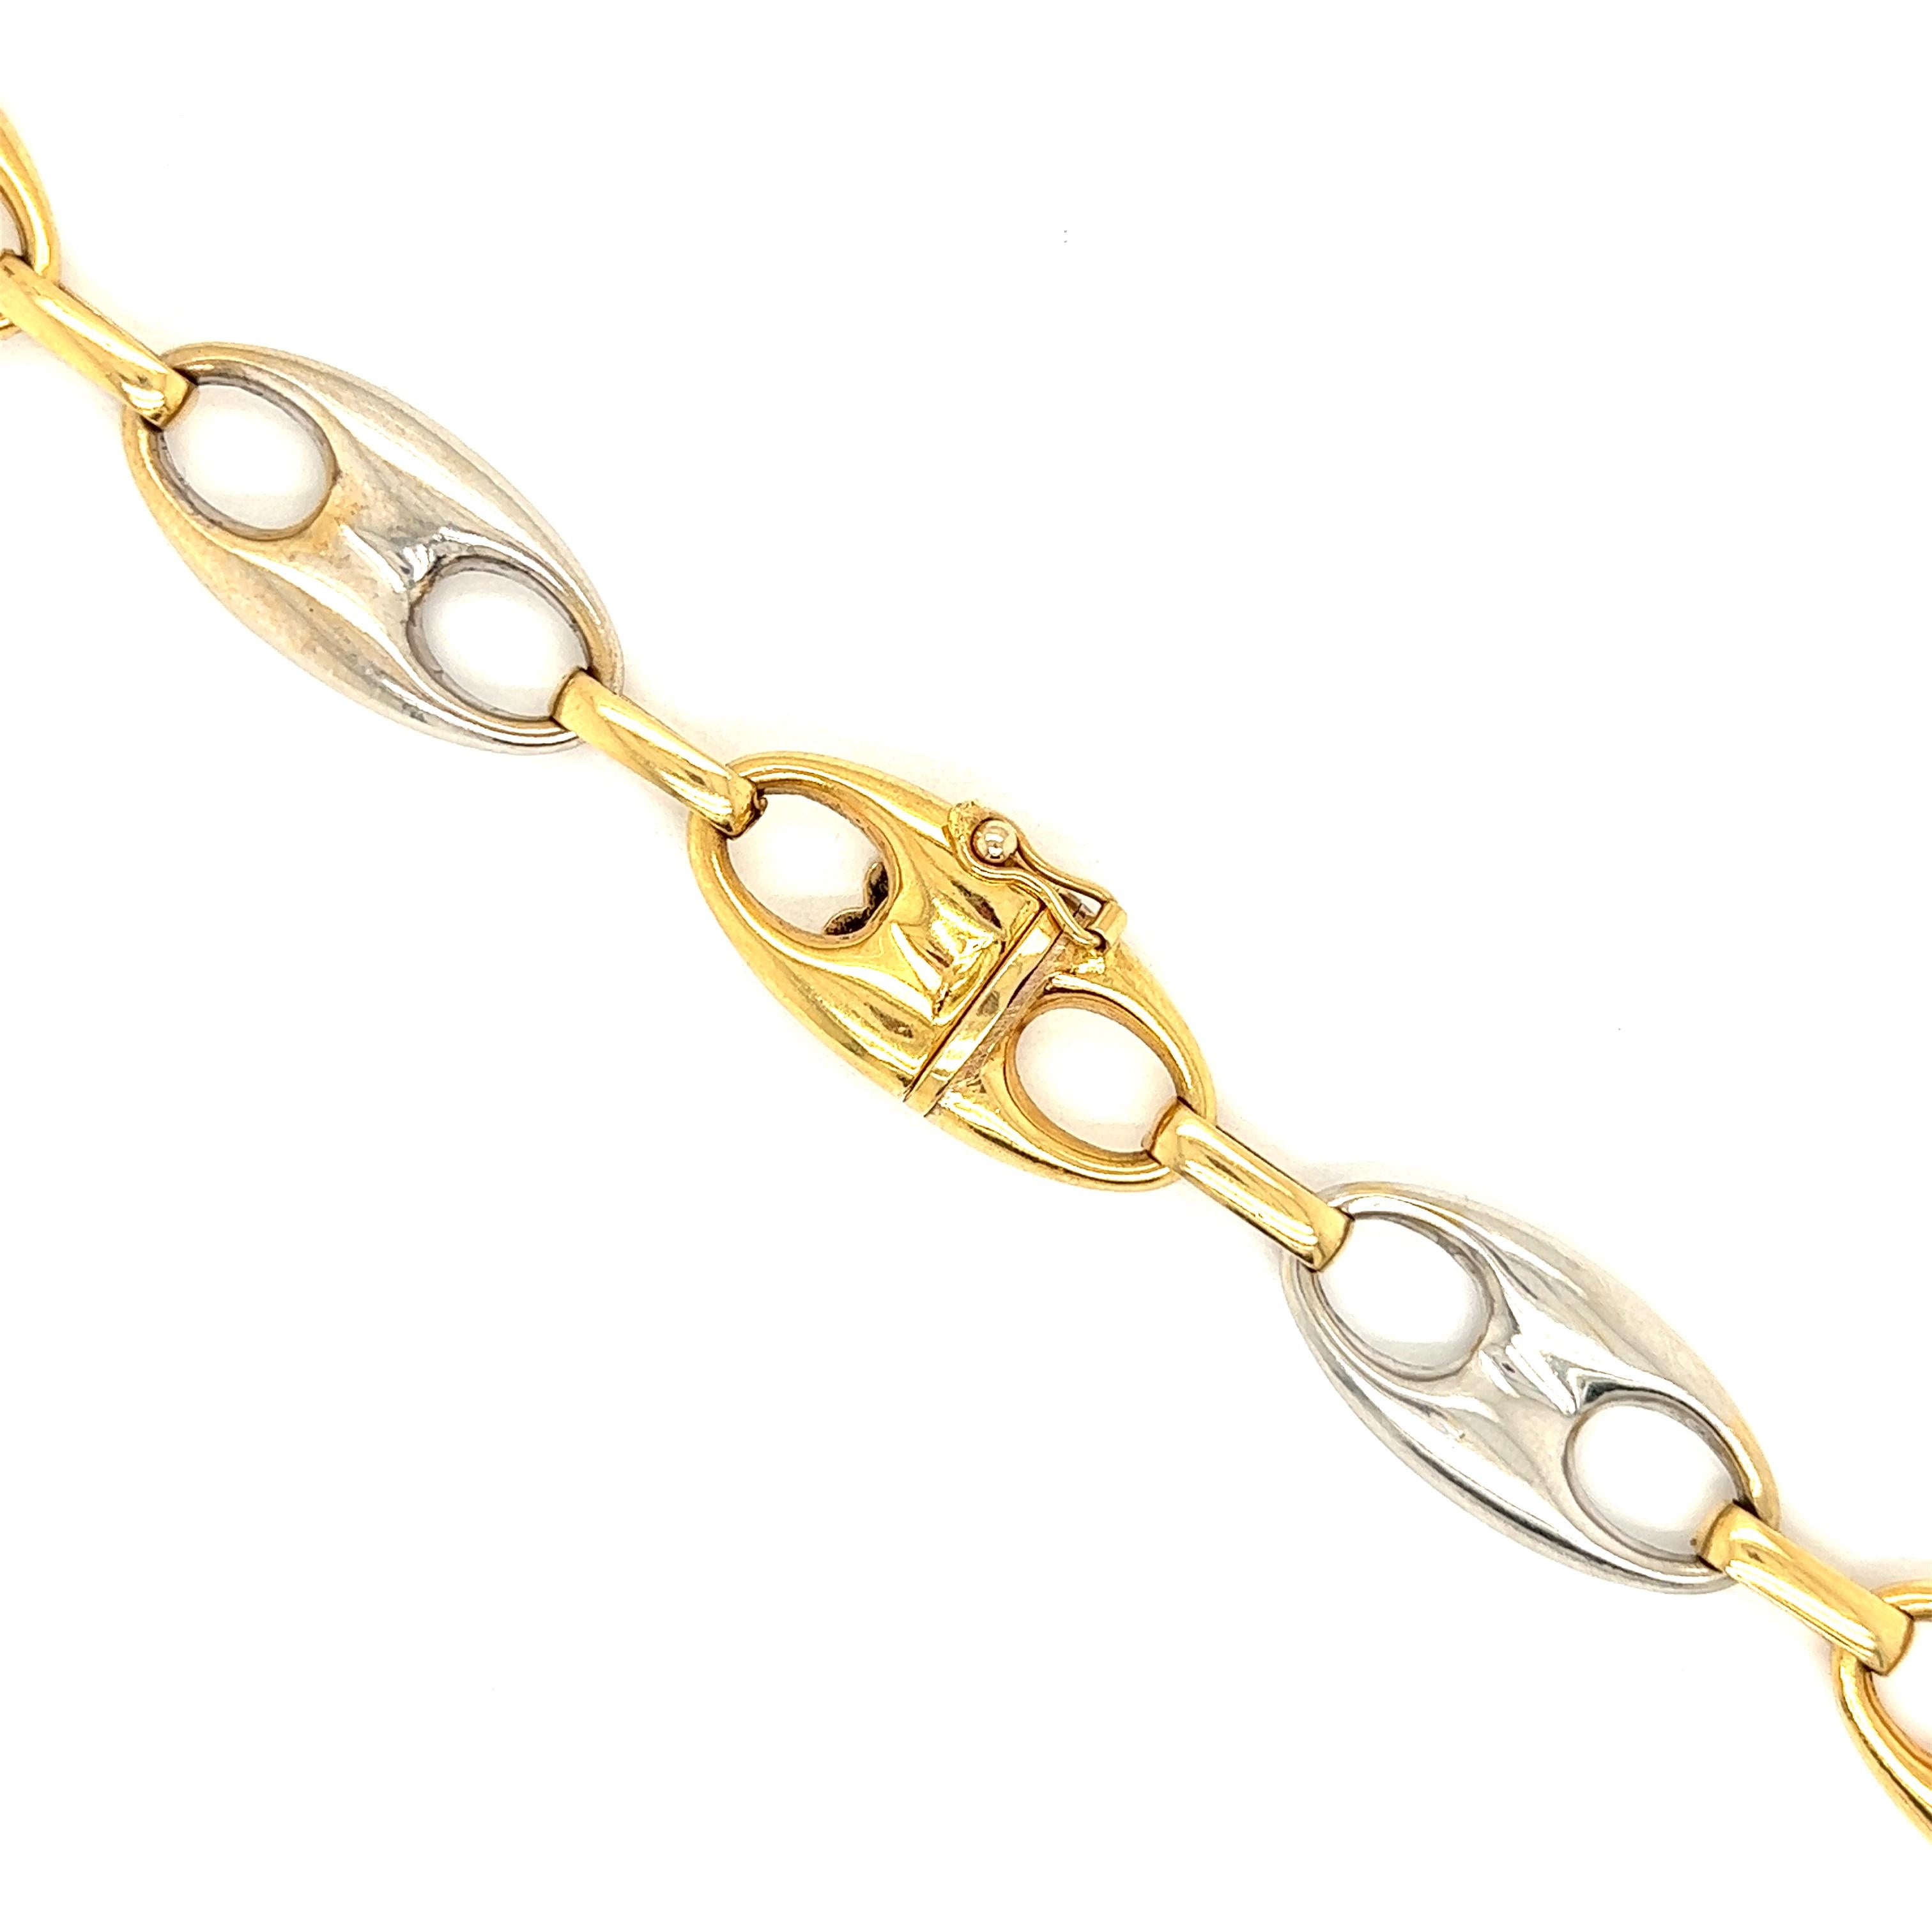 This timeless 18K Vintage White and Yellow Gold Mariner Link Chain 33